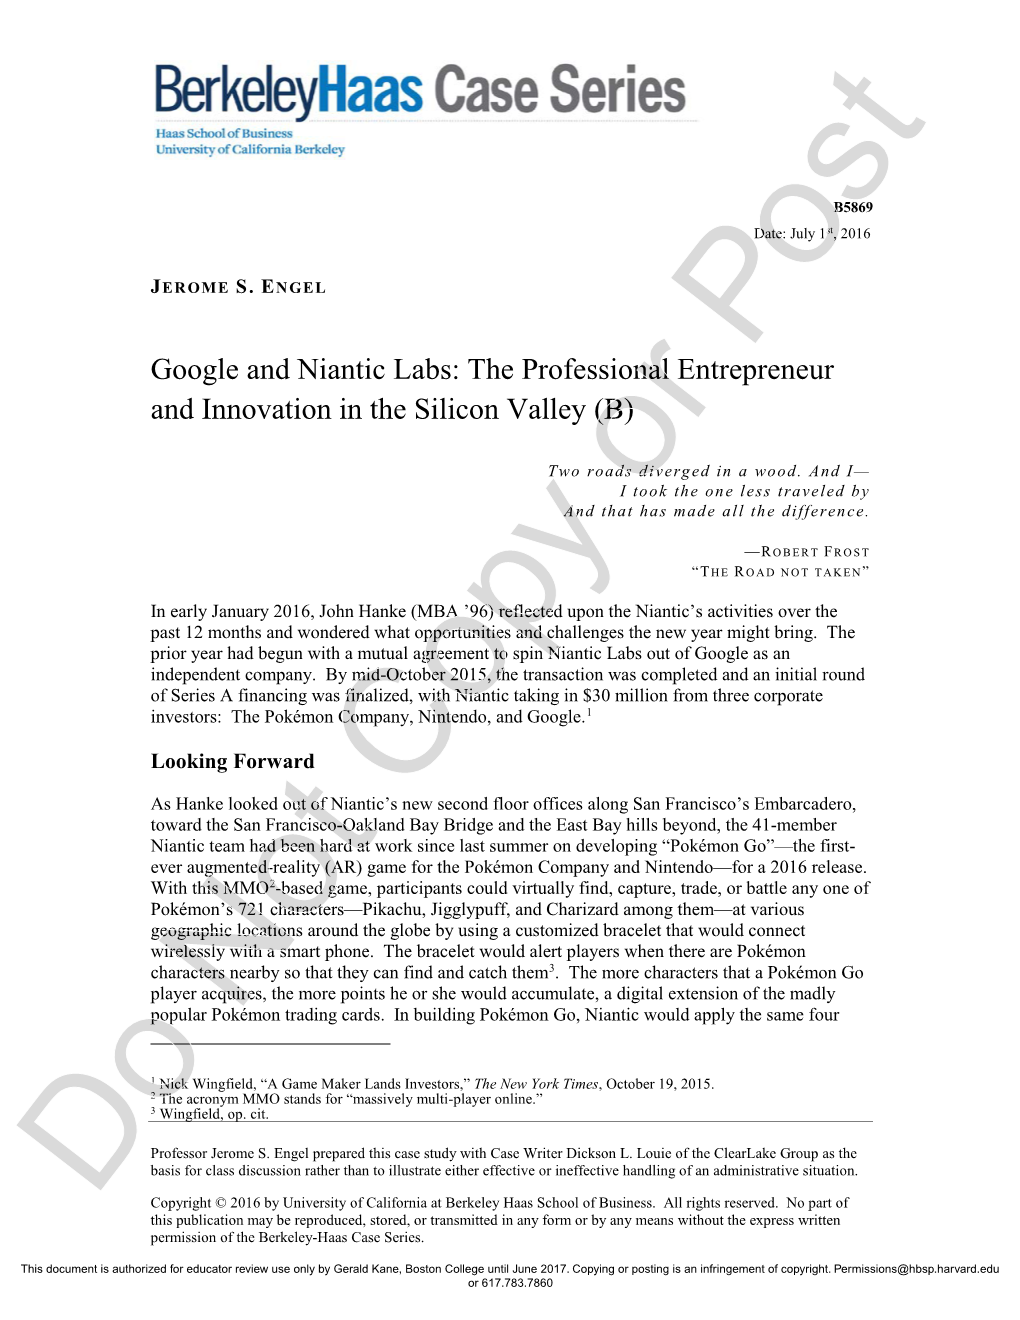 Google and Niantic Labs: the Professional Entrepreneur and Innovation in the Silicon Valley (B)